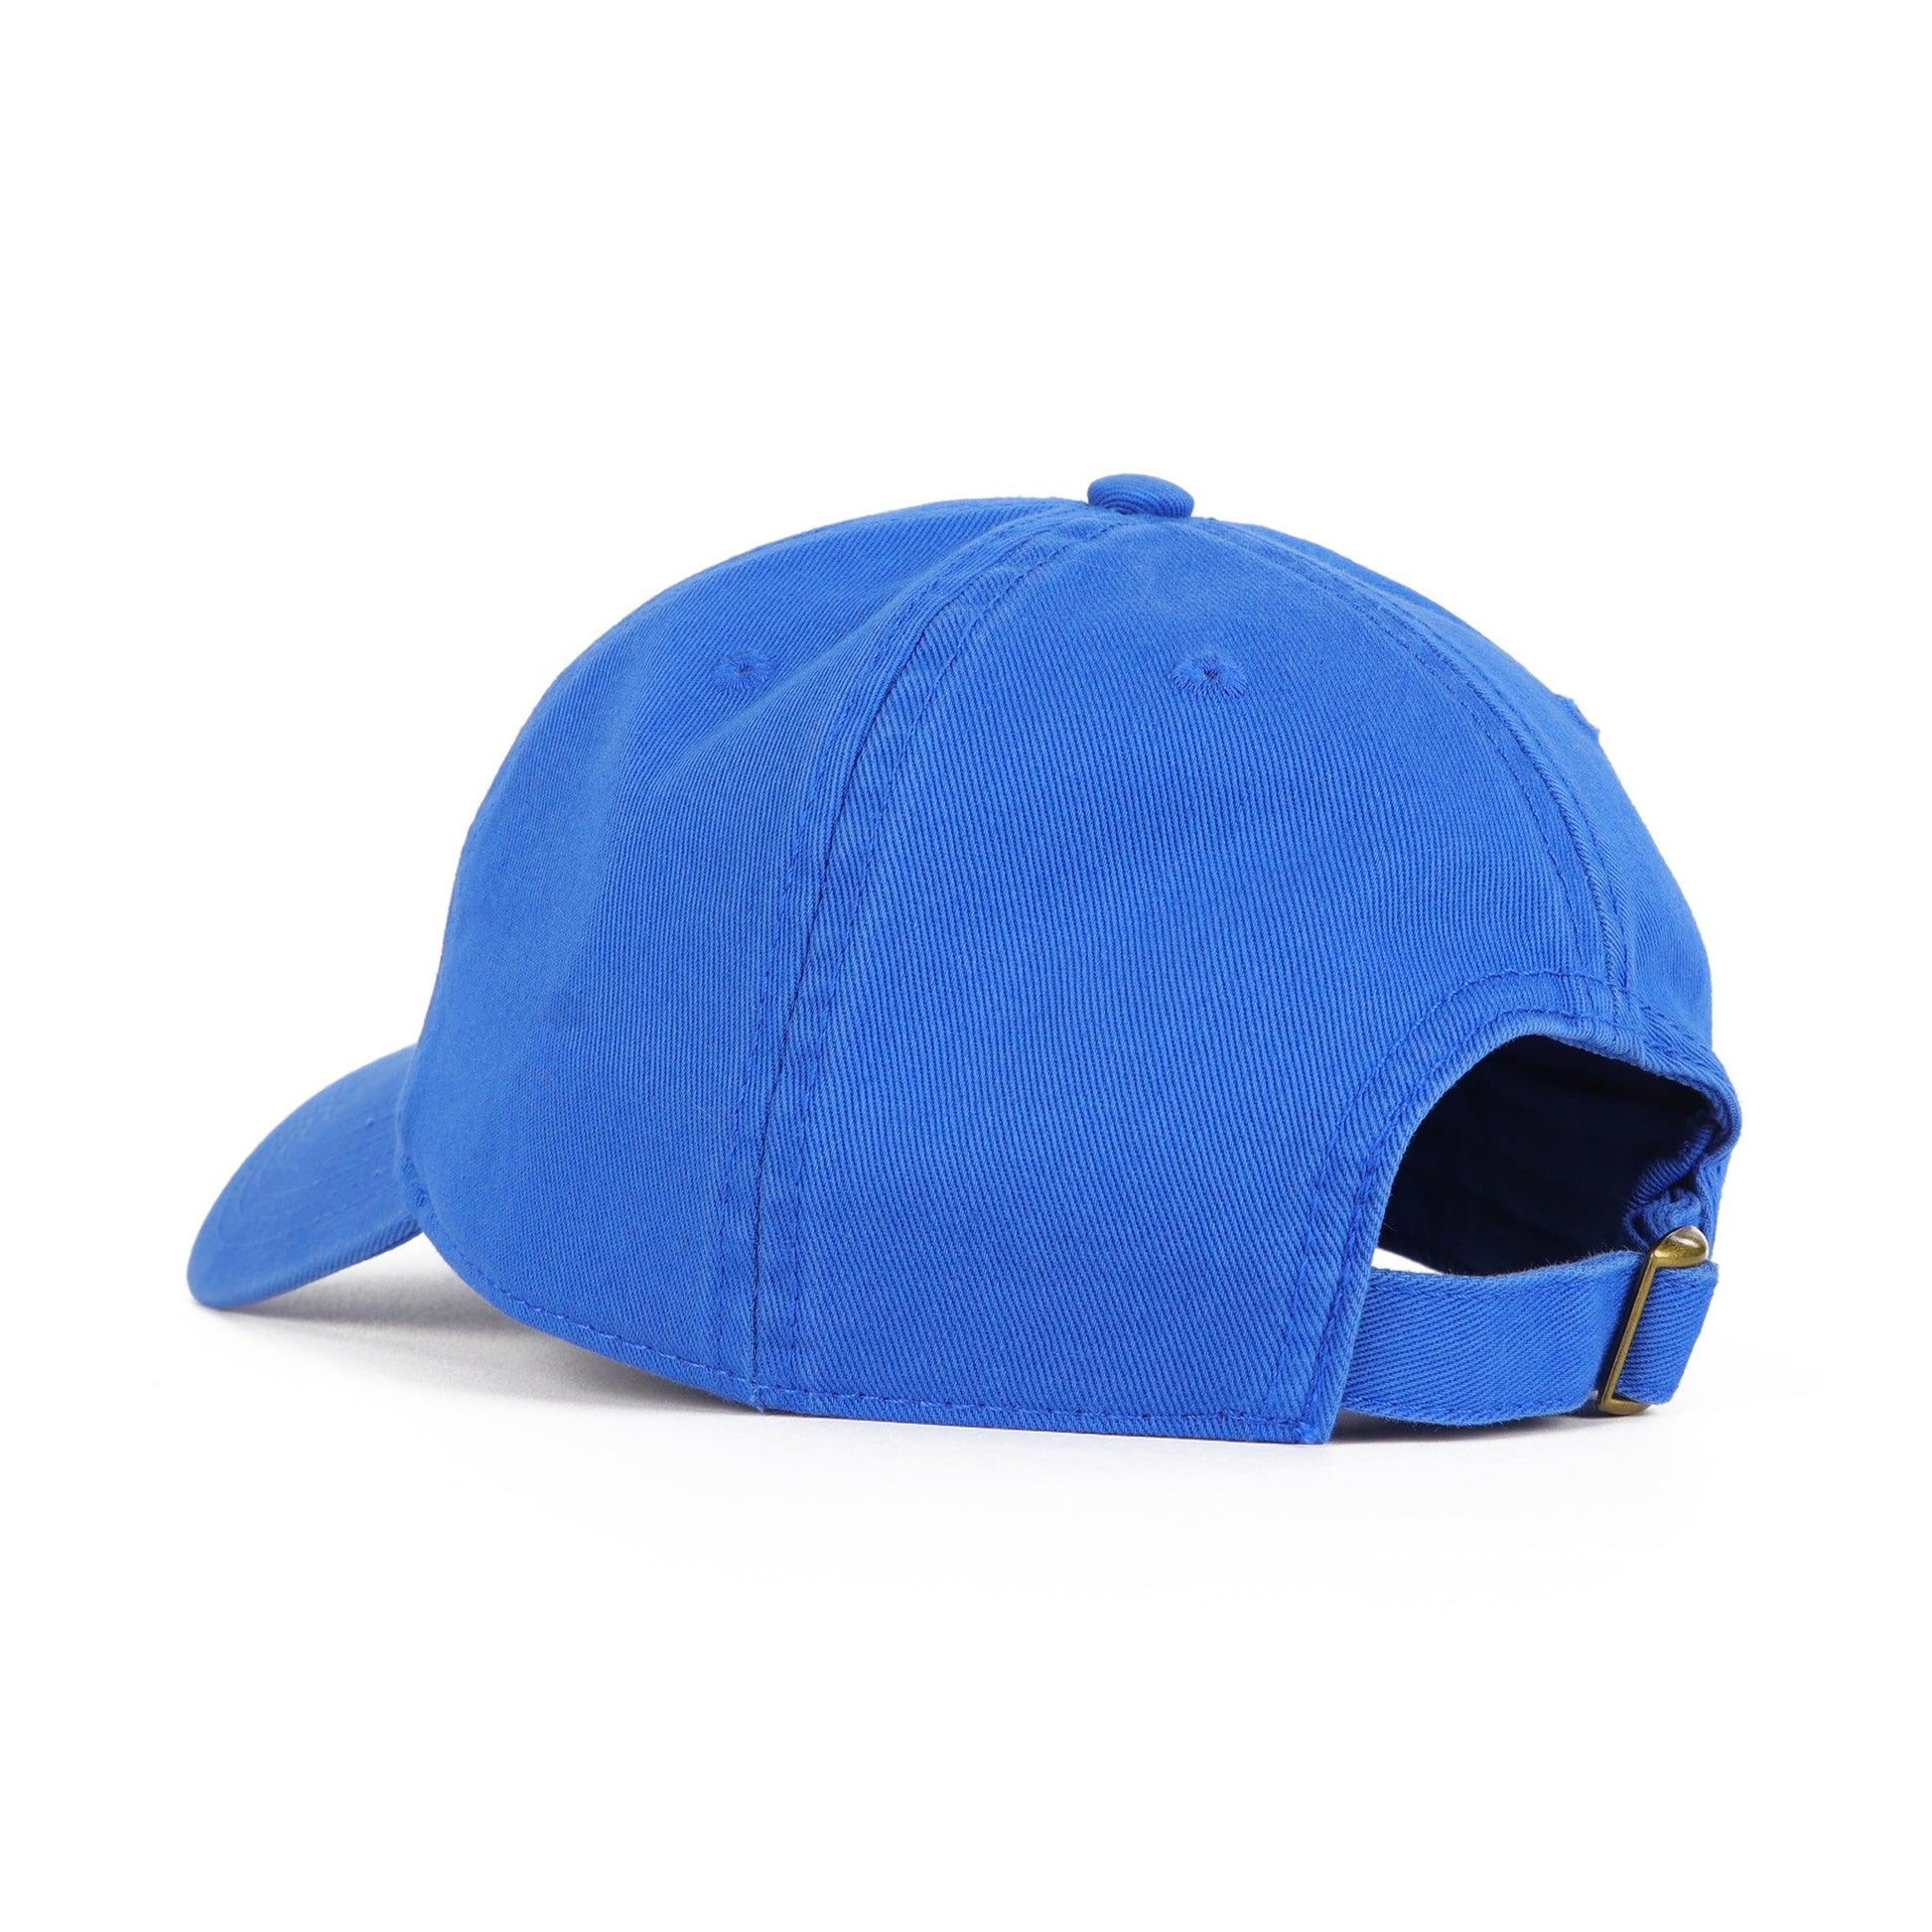 Back view of royal blue relaxed hat with adjustable strap with brass buckle.